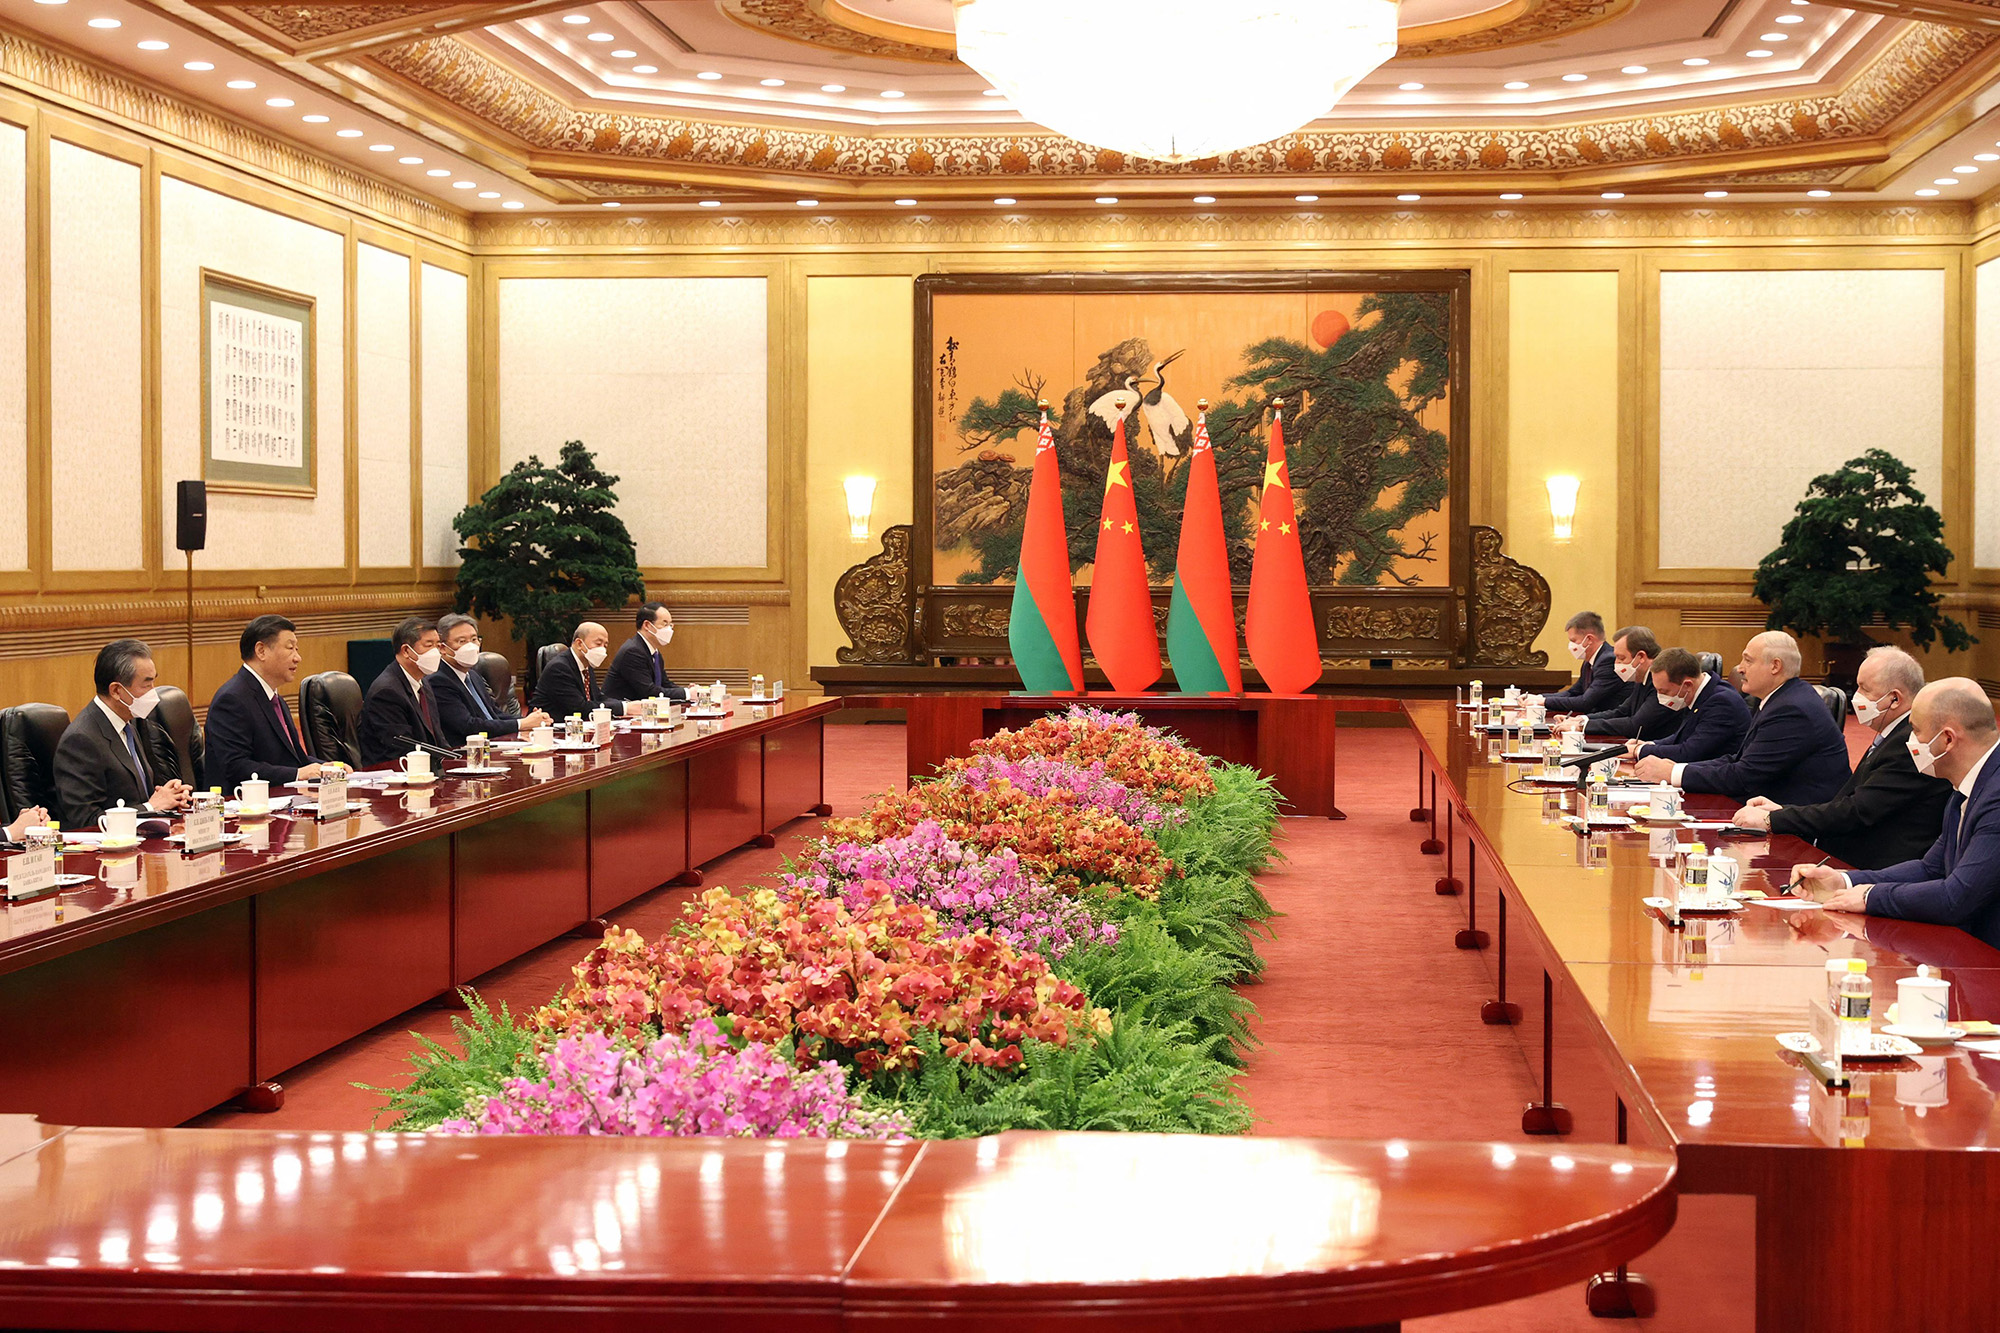 Belarus' President Alexander Lukashenko, third right, meets with Chinese President Xi Jinping, second left, in Beijing, China, on March 1.